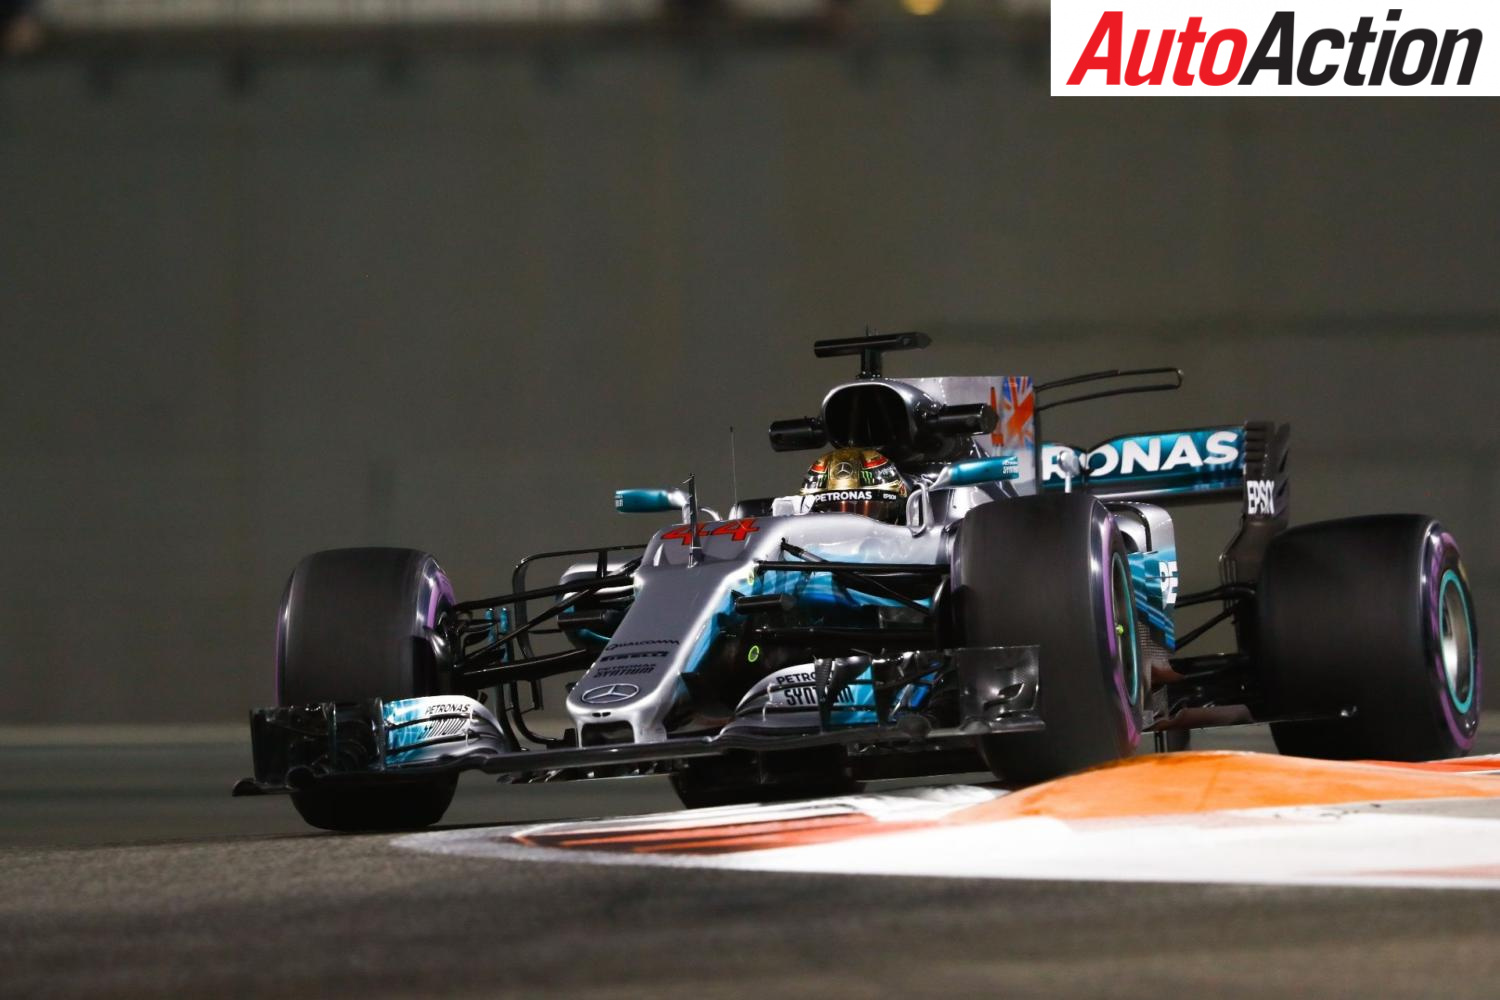 Lewis Hamilton has set the pace in practice ahead of the Abu Dhabi Grand Prix - Photo: LAT